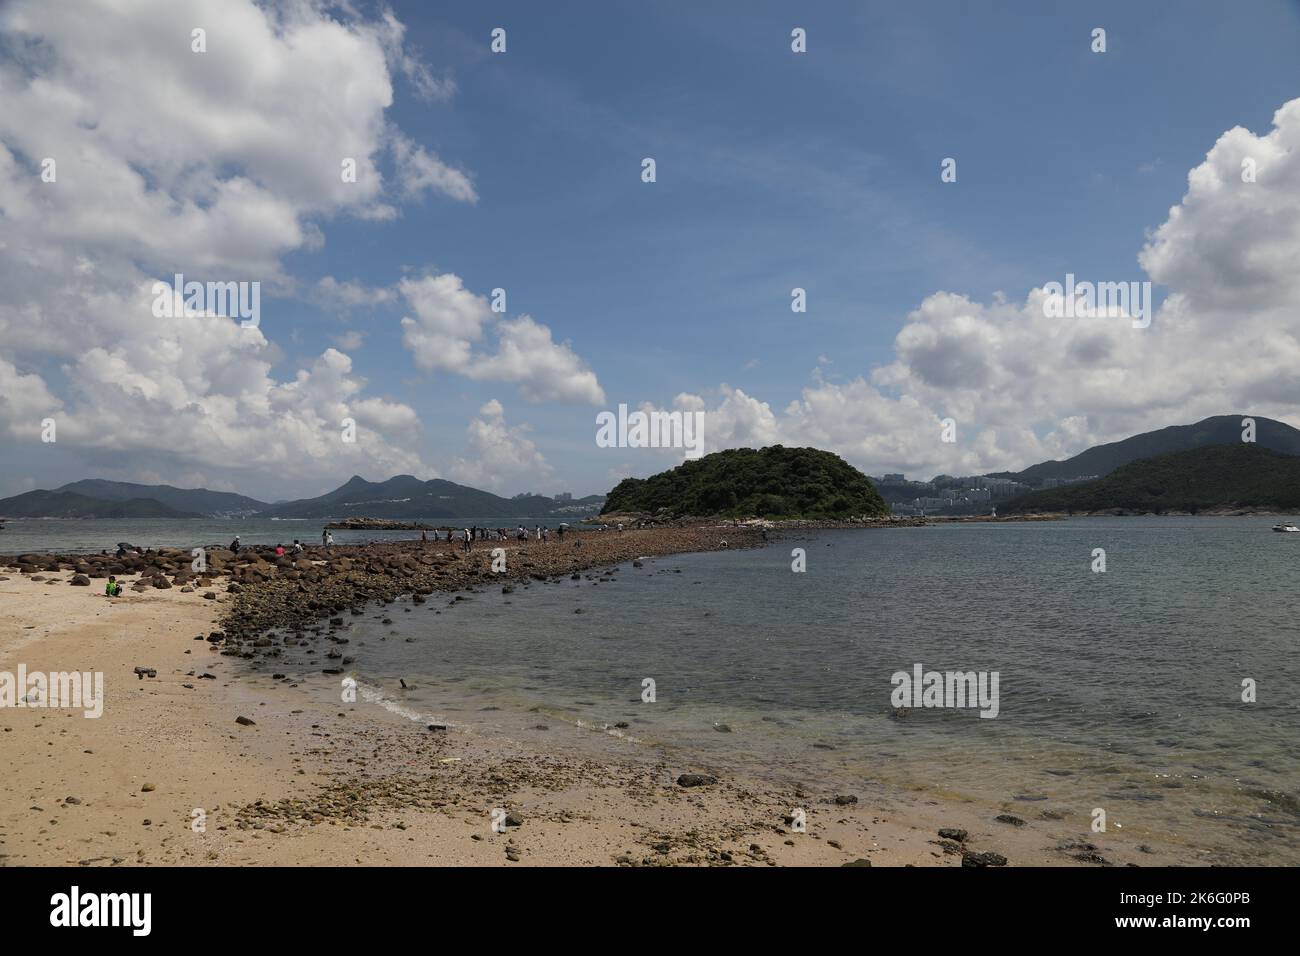 Sharp Island located in Sai Kung, Hong Kong is an outlying island famous of beach for swimming and snorkeling, also tombolo connecting Kiu Tau Island Stock Photo